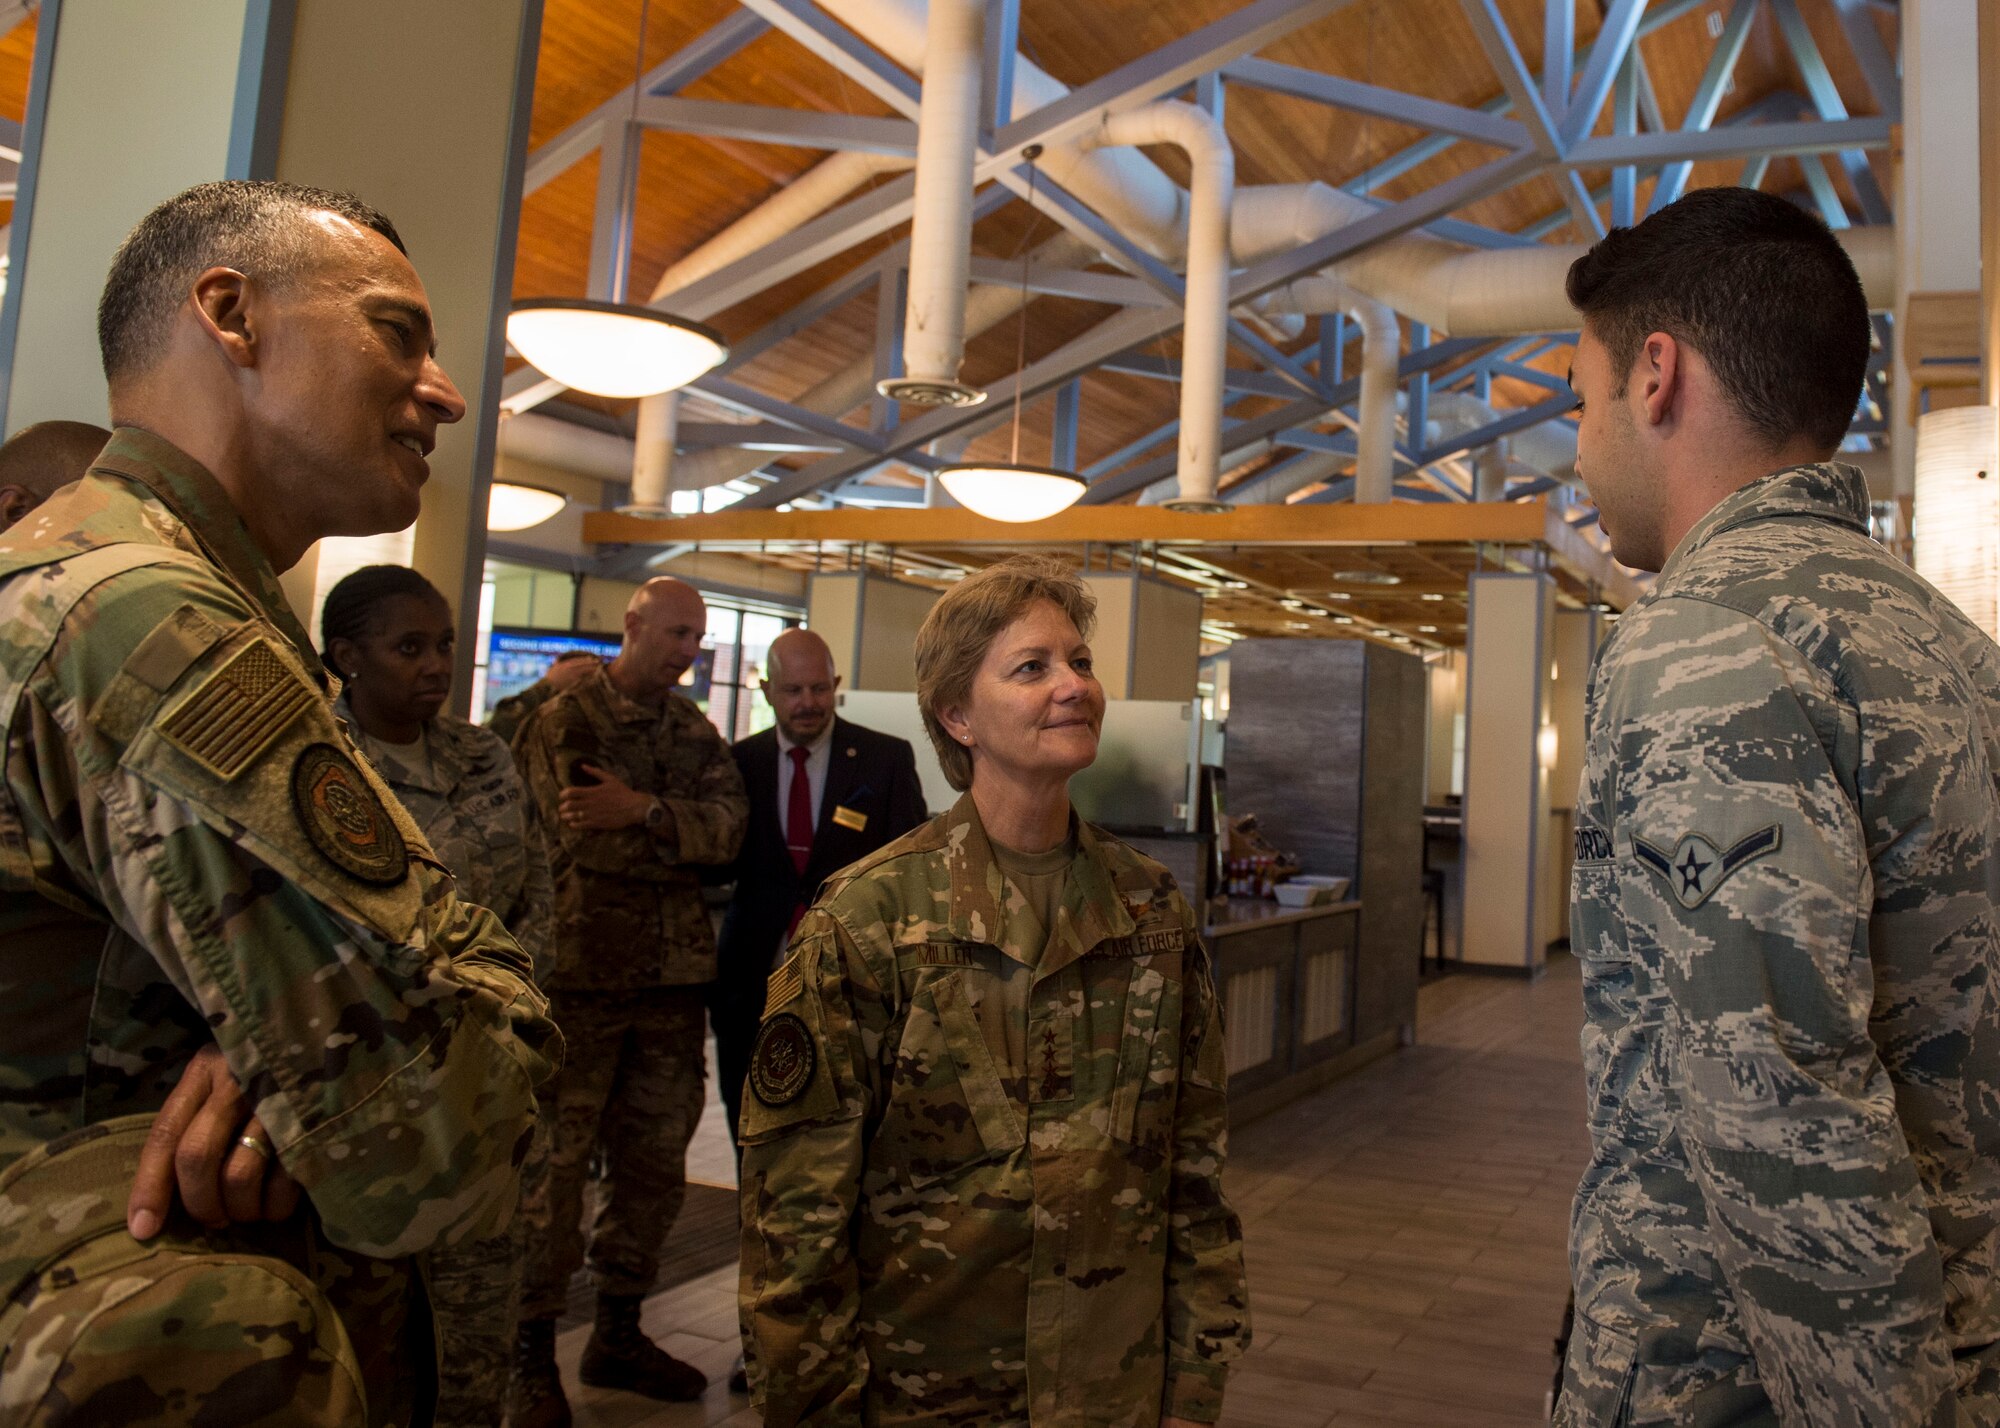 Airman Skyler Locklear, right, assigned to the 628th Force Support Squadron, meets Gen. Maryanne Miller, center, commander of Air Mobility Command, and Chief Master Sgt. Terrence Greene, AMC command chief master sergeant, during a tour of the Gaylor Dining Facility at Joint Base Charleston, South Carolina, July 30, 2019. Miller and Greene visited JB Charleston July 29 to August 1 to get a first-hand look at mission capabilities, new innovative programs and how JB Charleston is taking care of its service members to build a stronger mobility force.  The dining facility re-opened February 2019 after a two-year renovation. The renovations help dining facility personnel adjust to changing dietary needs and preferences, and improves efficiency and reduces costs while maintaining mission feeding capabilities.